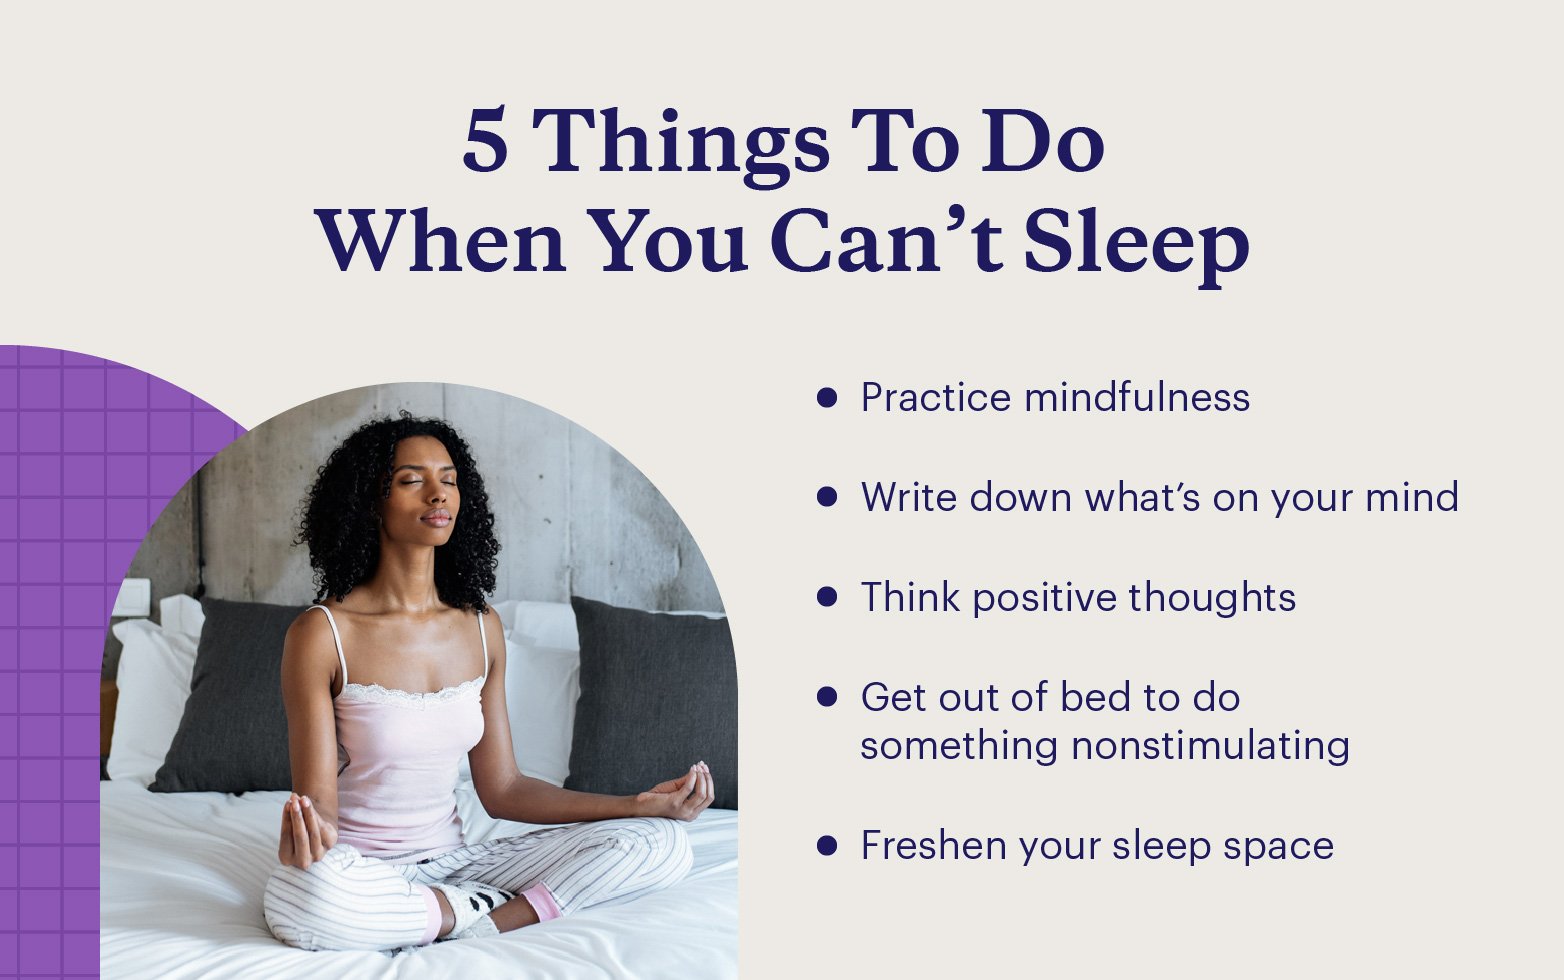 Some things to do when you can’t sleep include practicing mindful meditation and freshening up your sleep space.